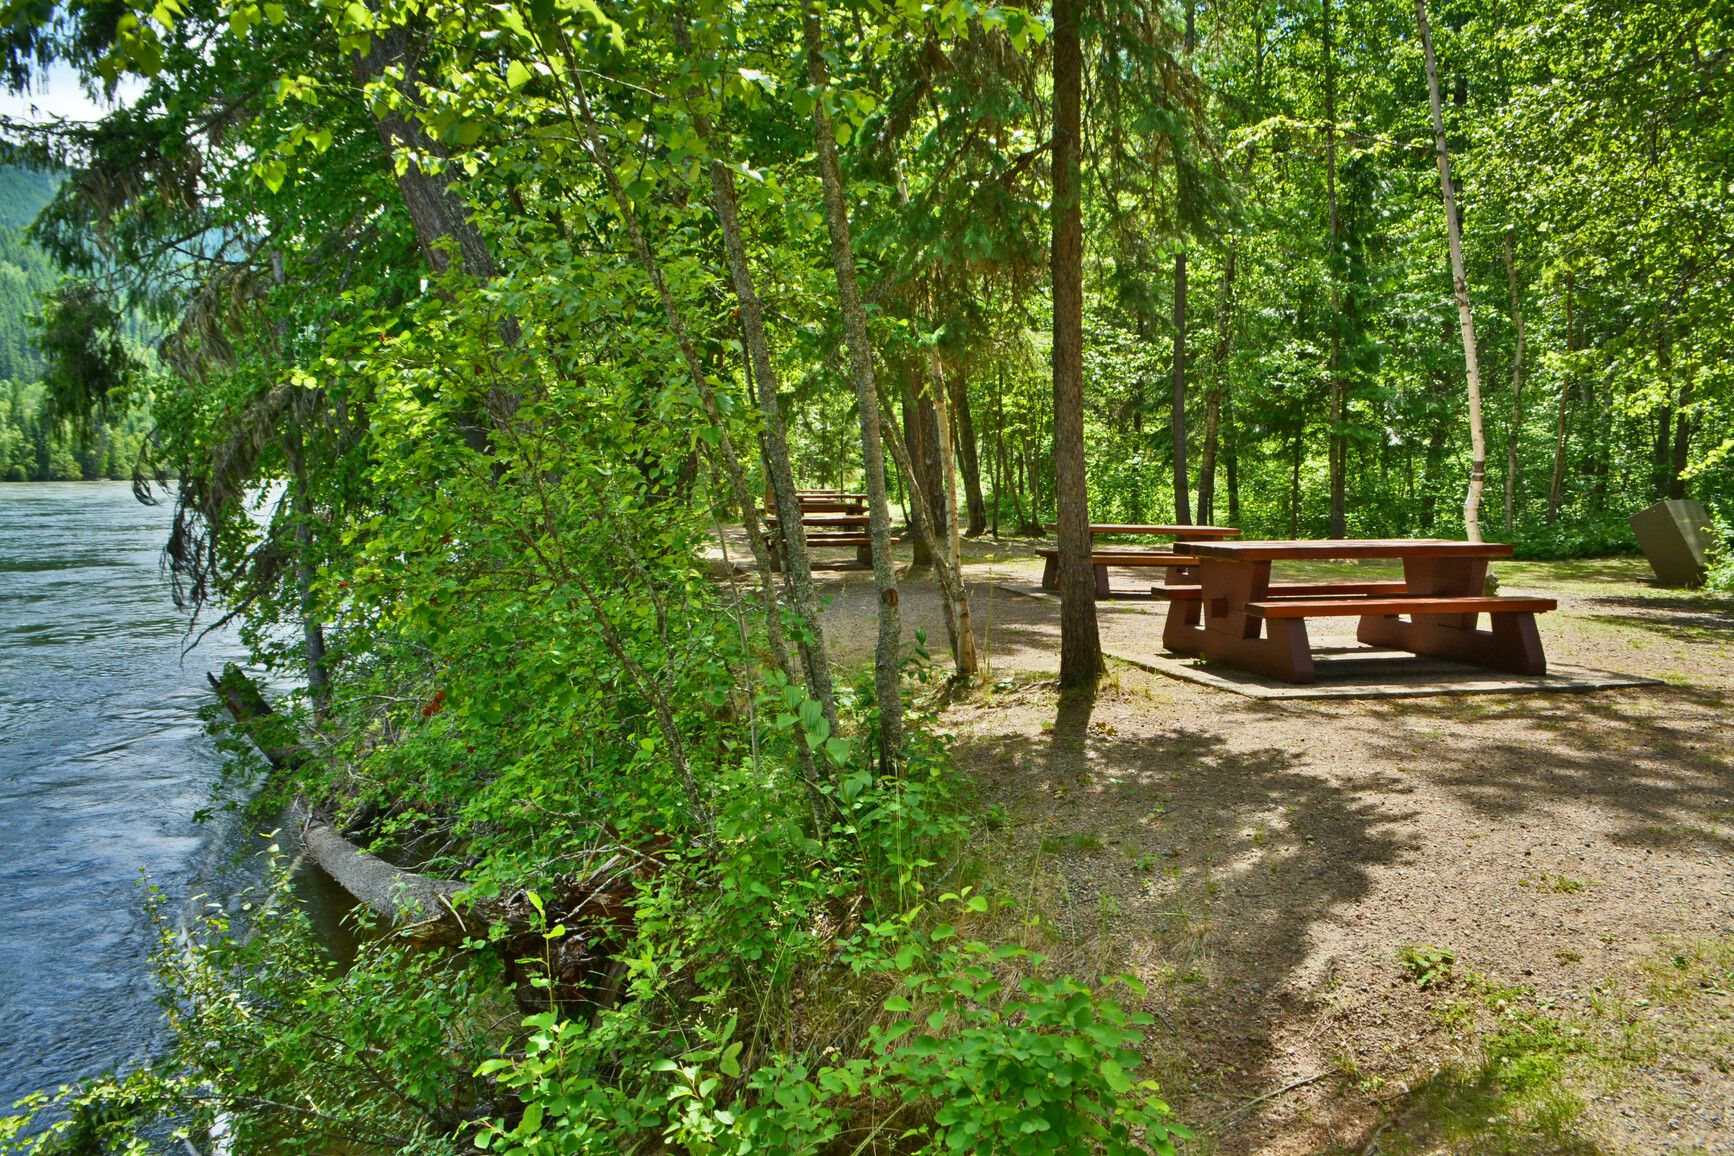 Day-use area by the river in Thompson River Park, surrounded by forest.